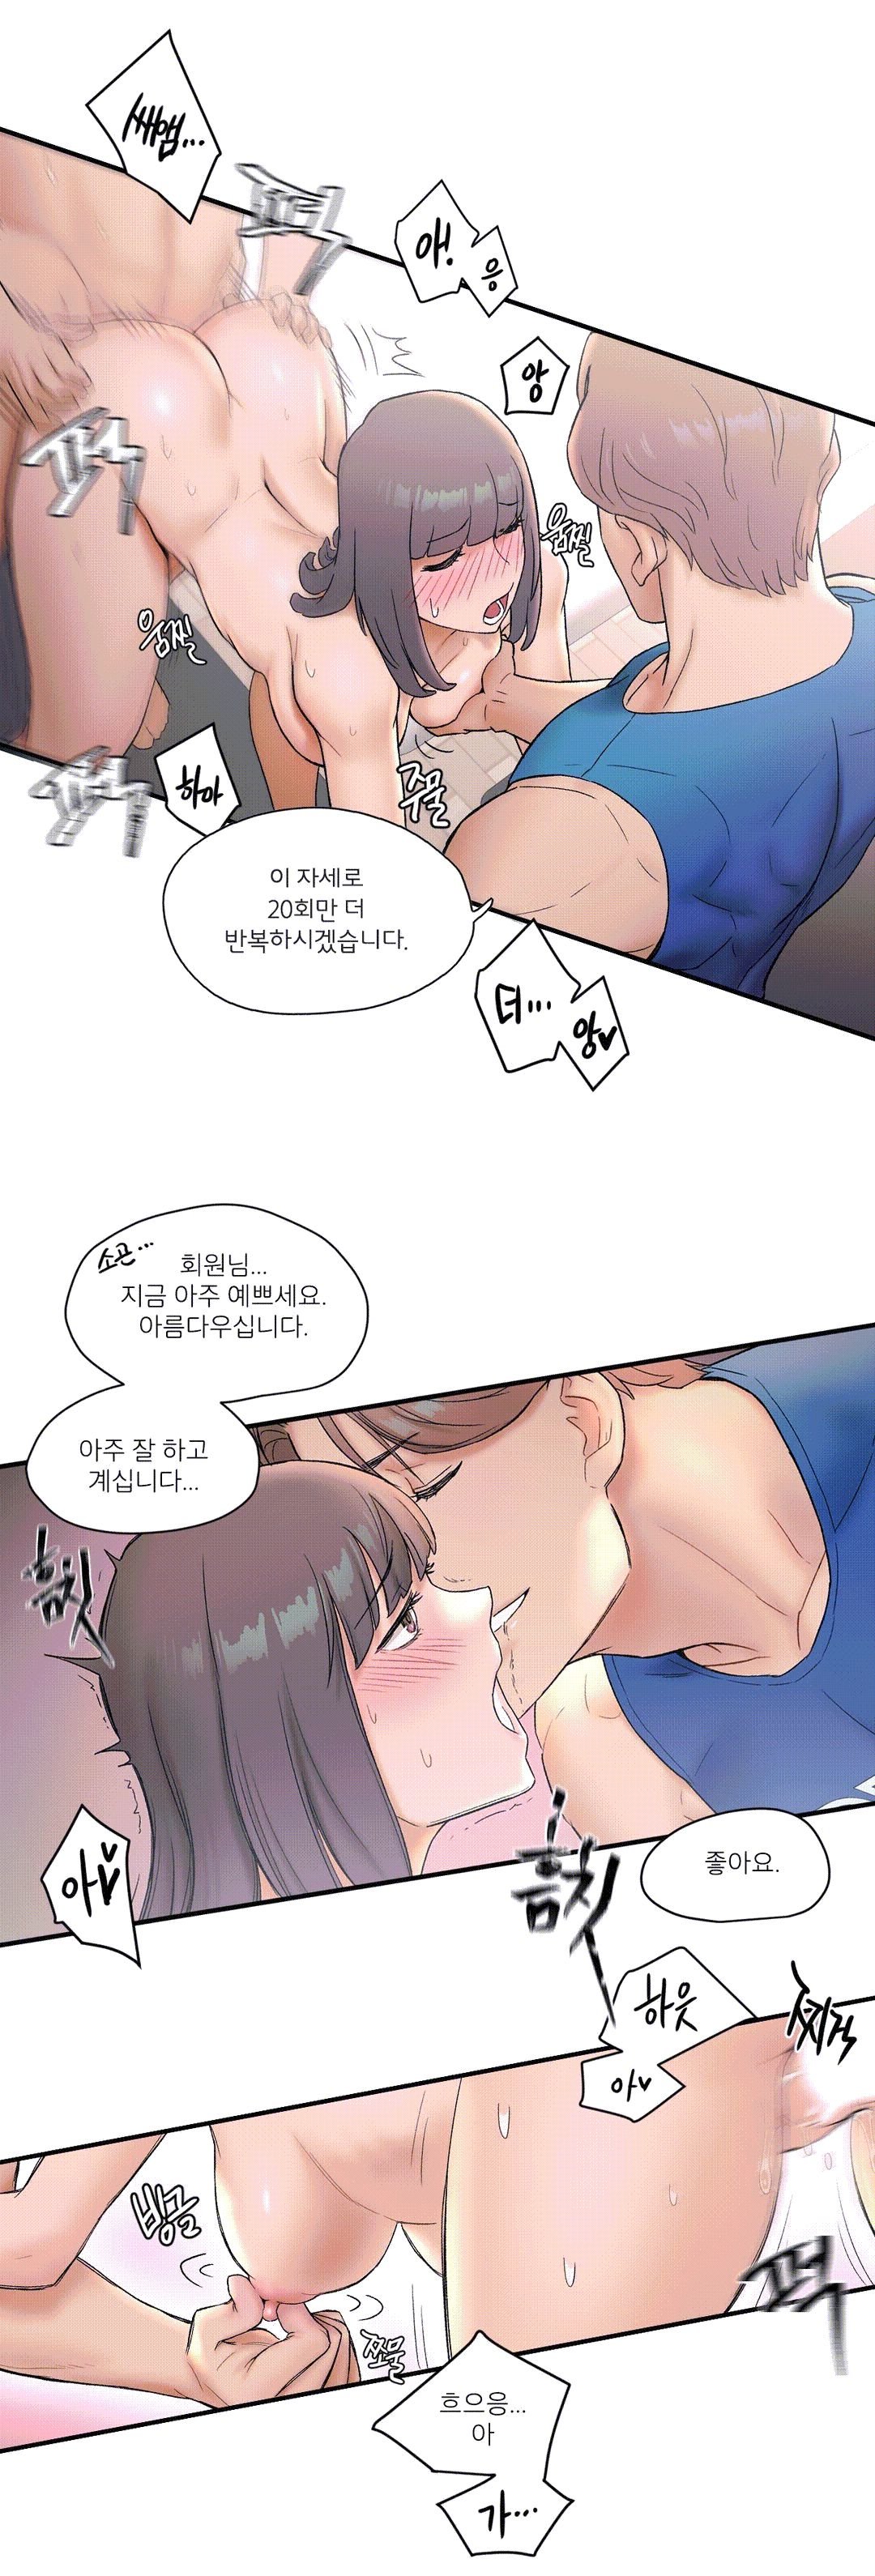 Sexercise Raw - Chapter 8 Page 8